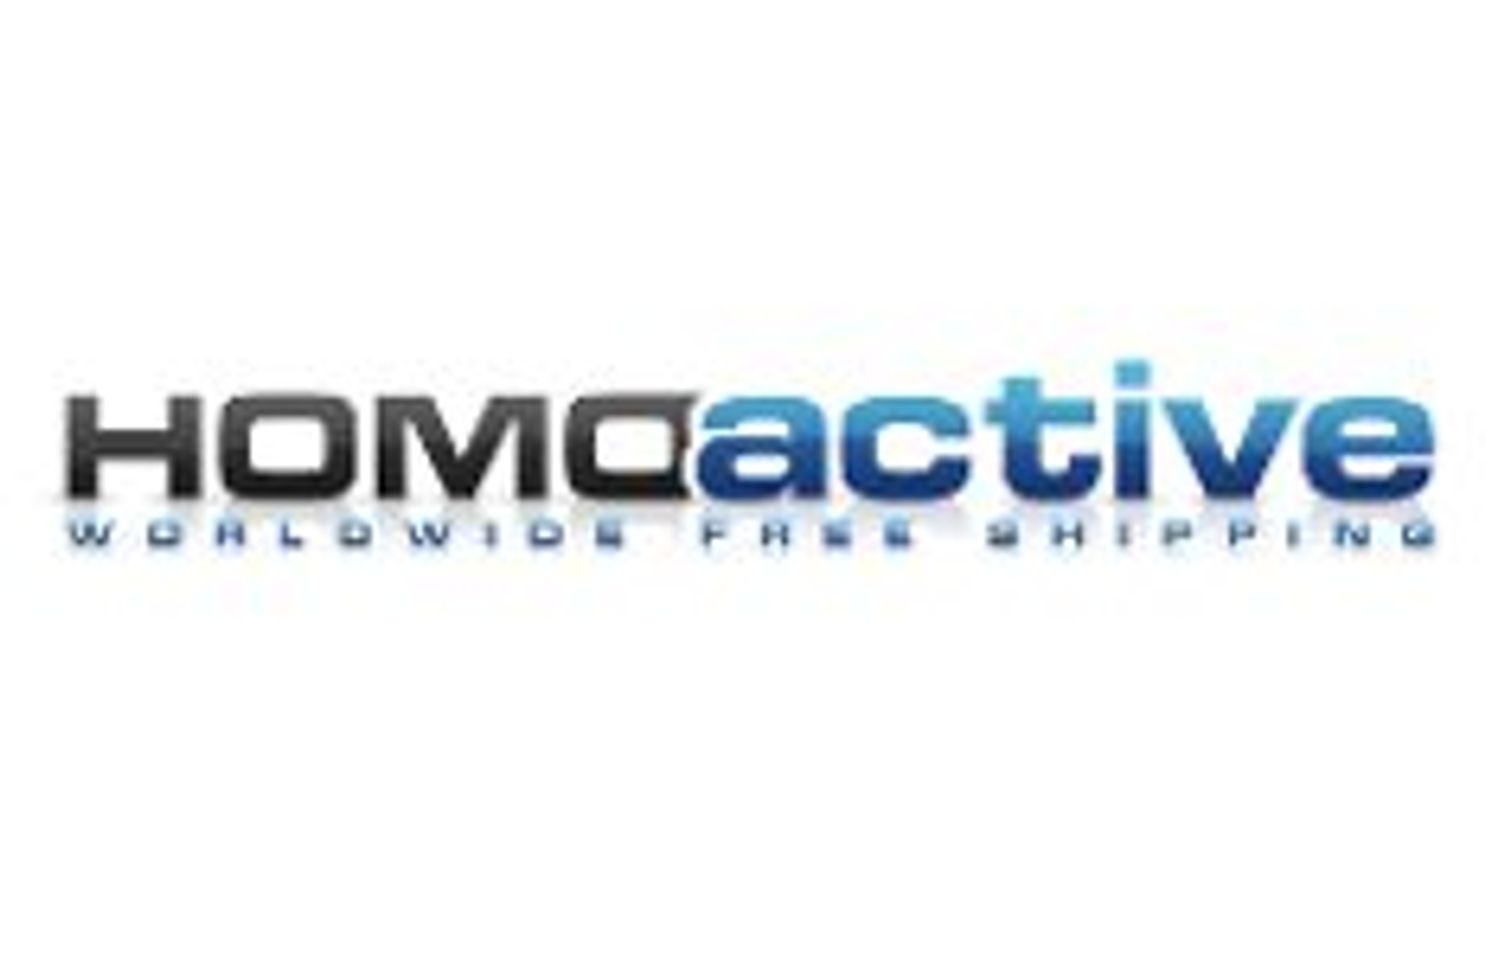 Homoactive.com Re-Launches